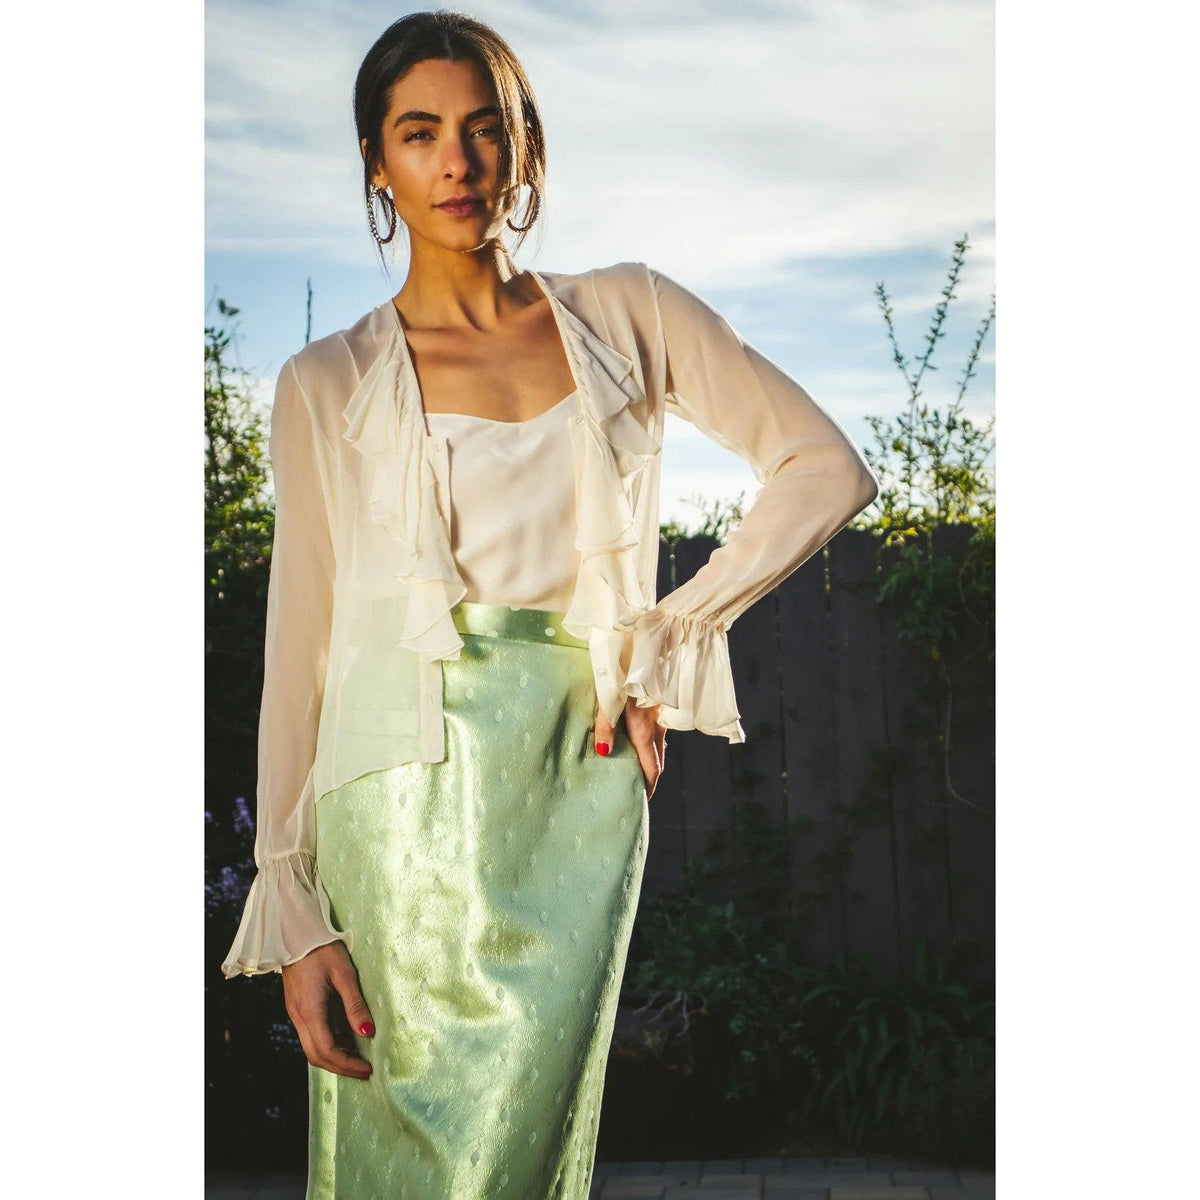 Pre-Owned SUSAN BECKER 90's Green Silk Skirt - theREMODA